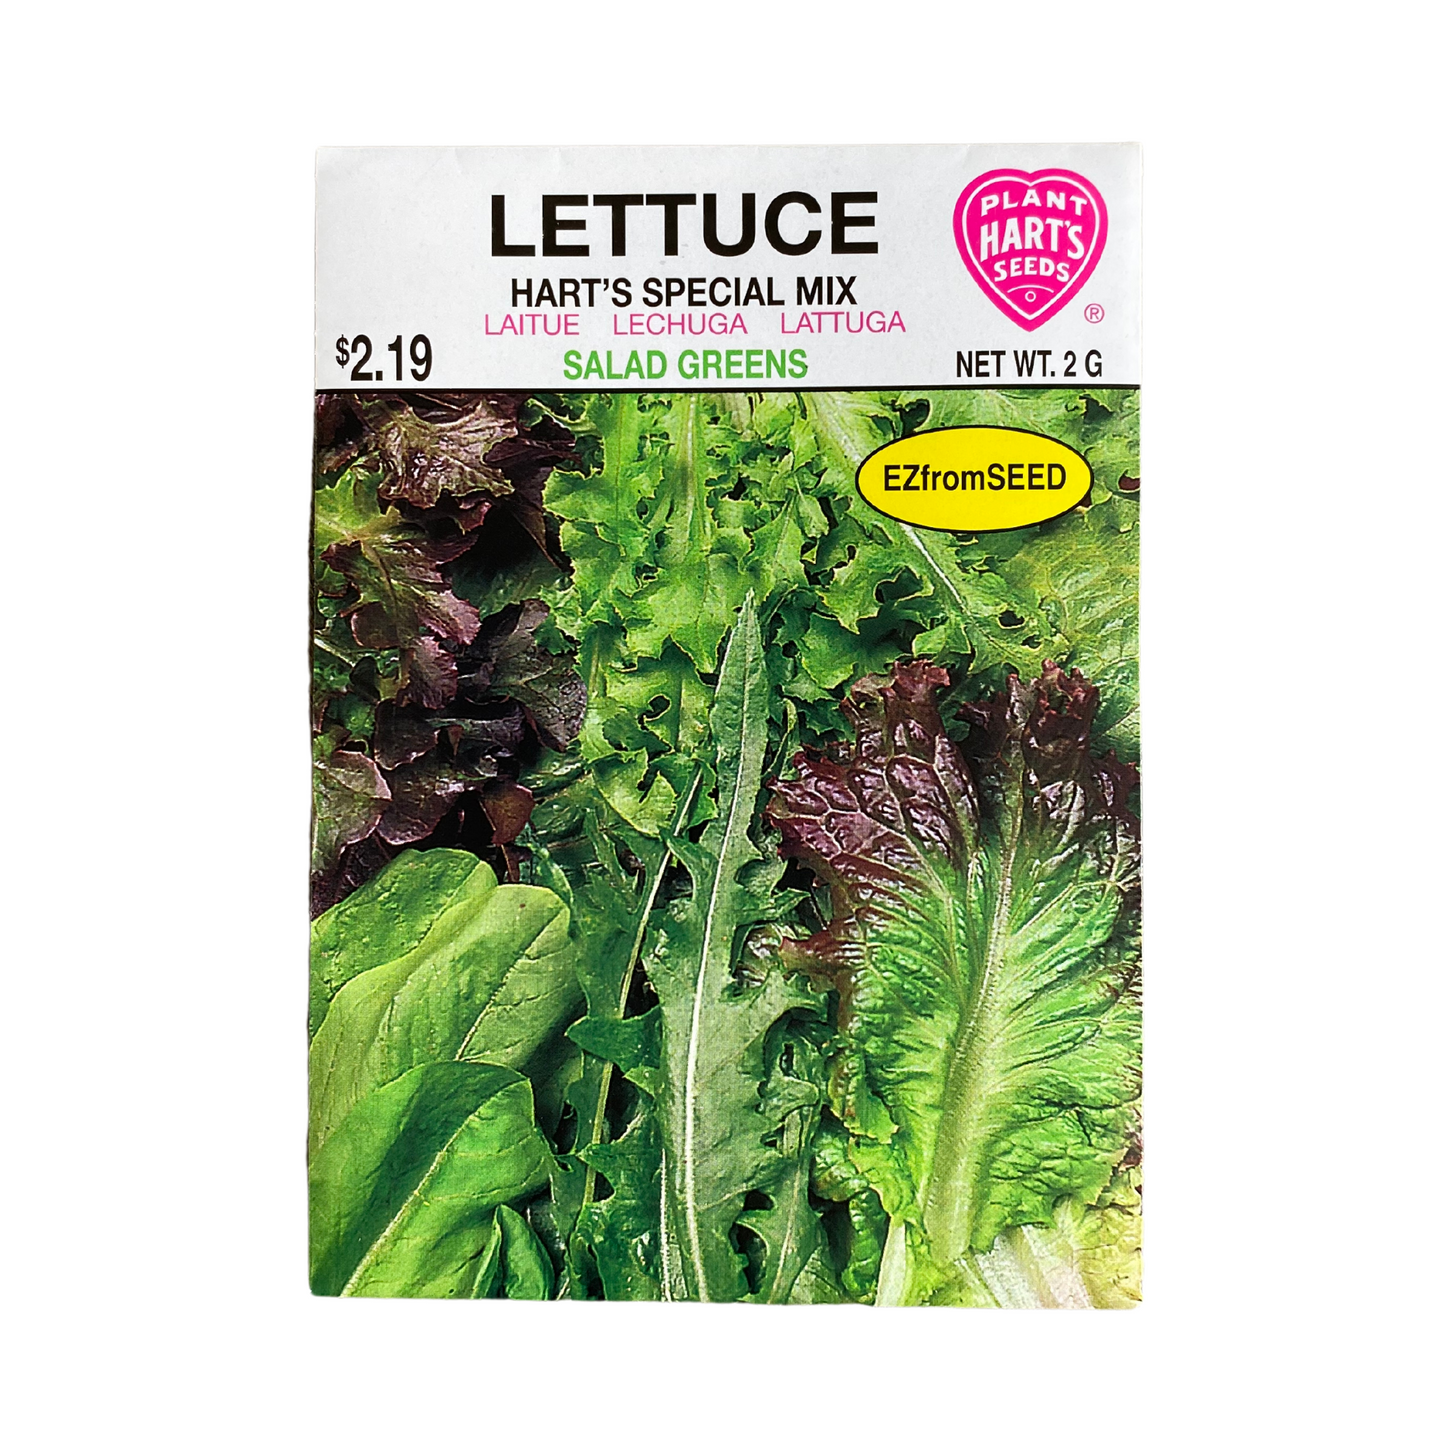 Lettuce Hart's Special Mix